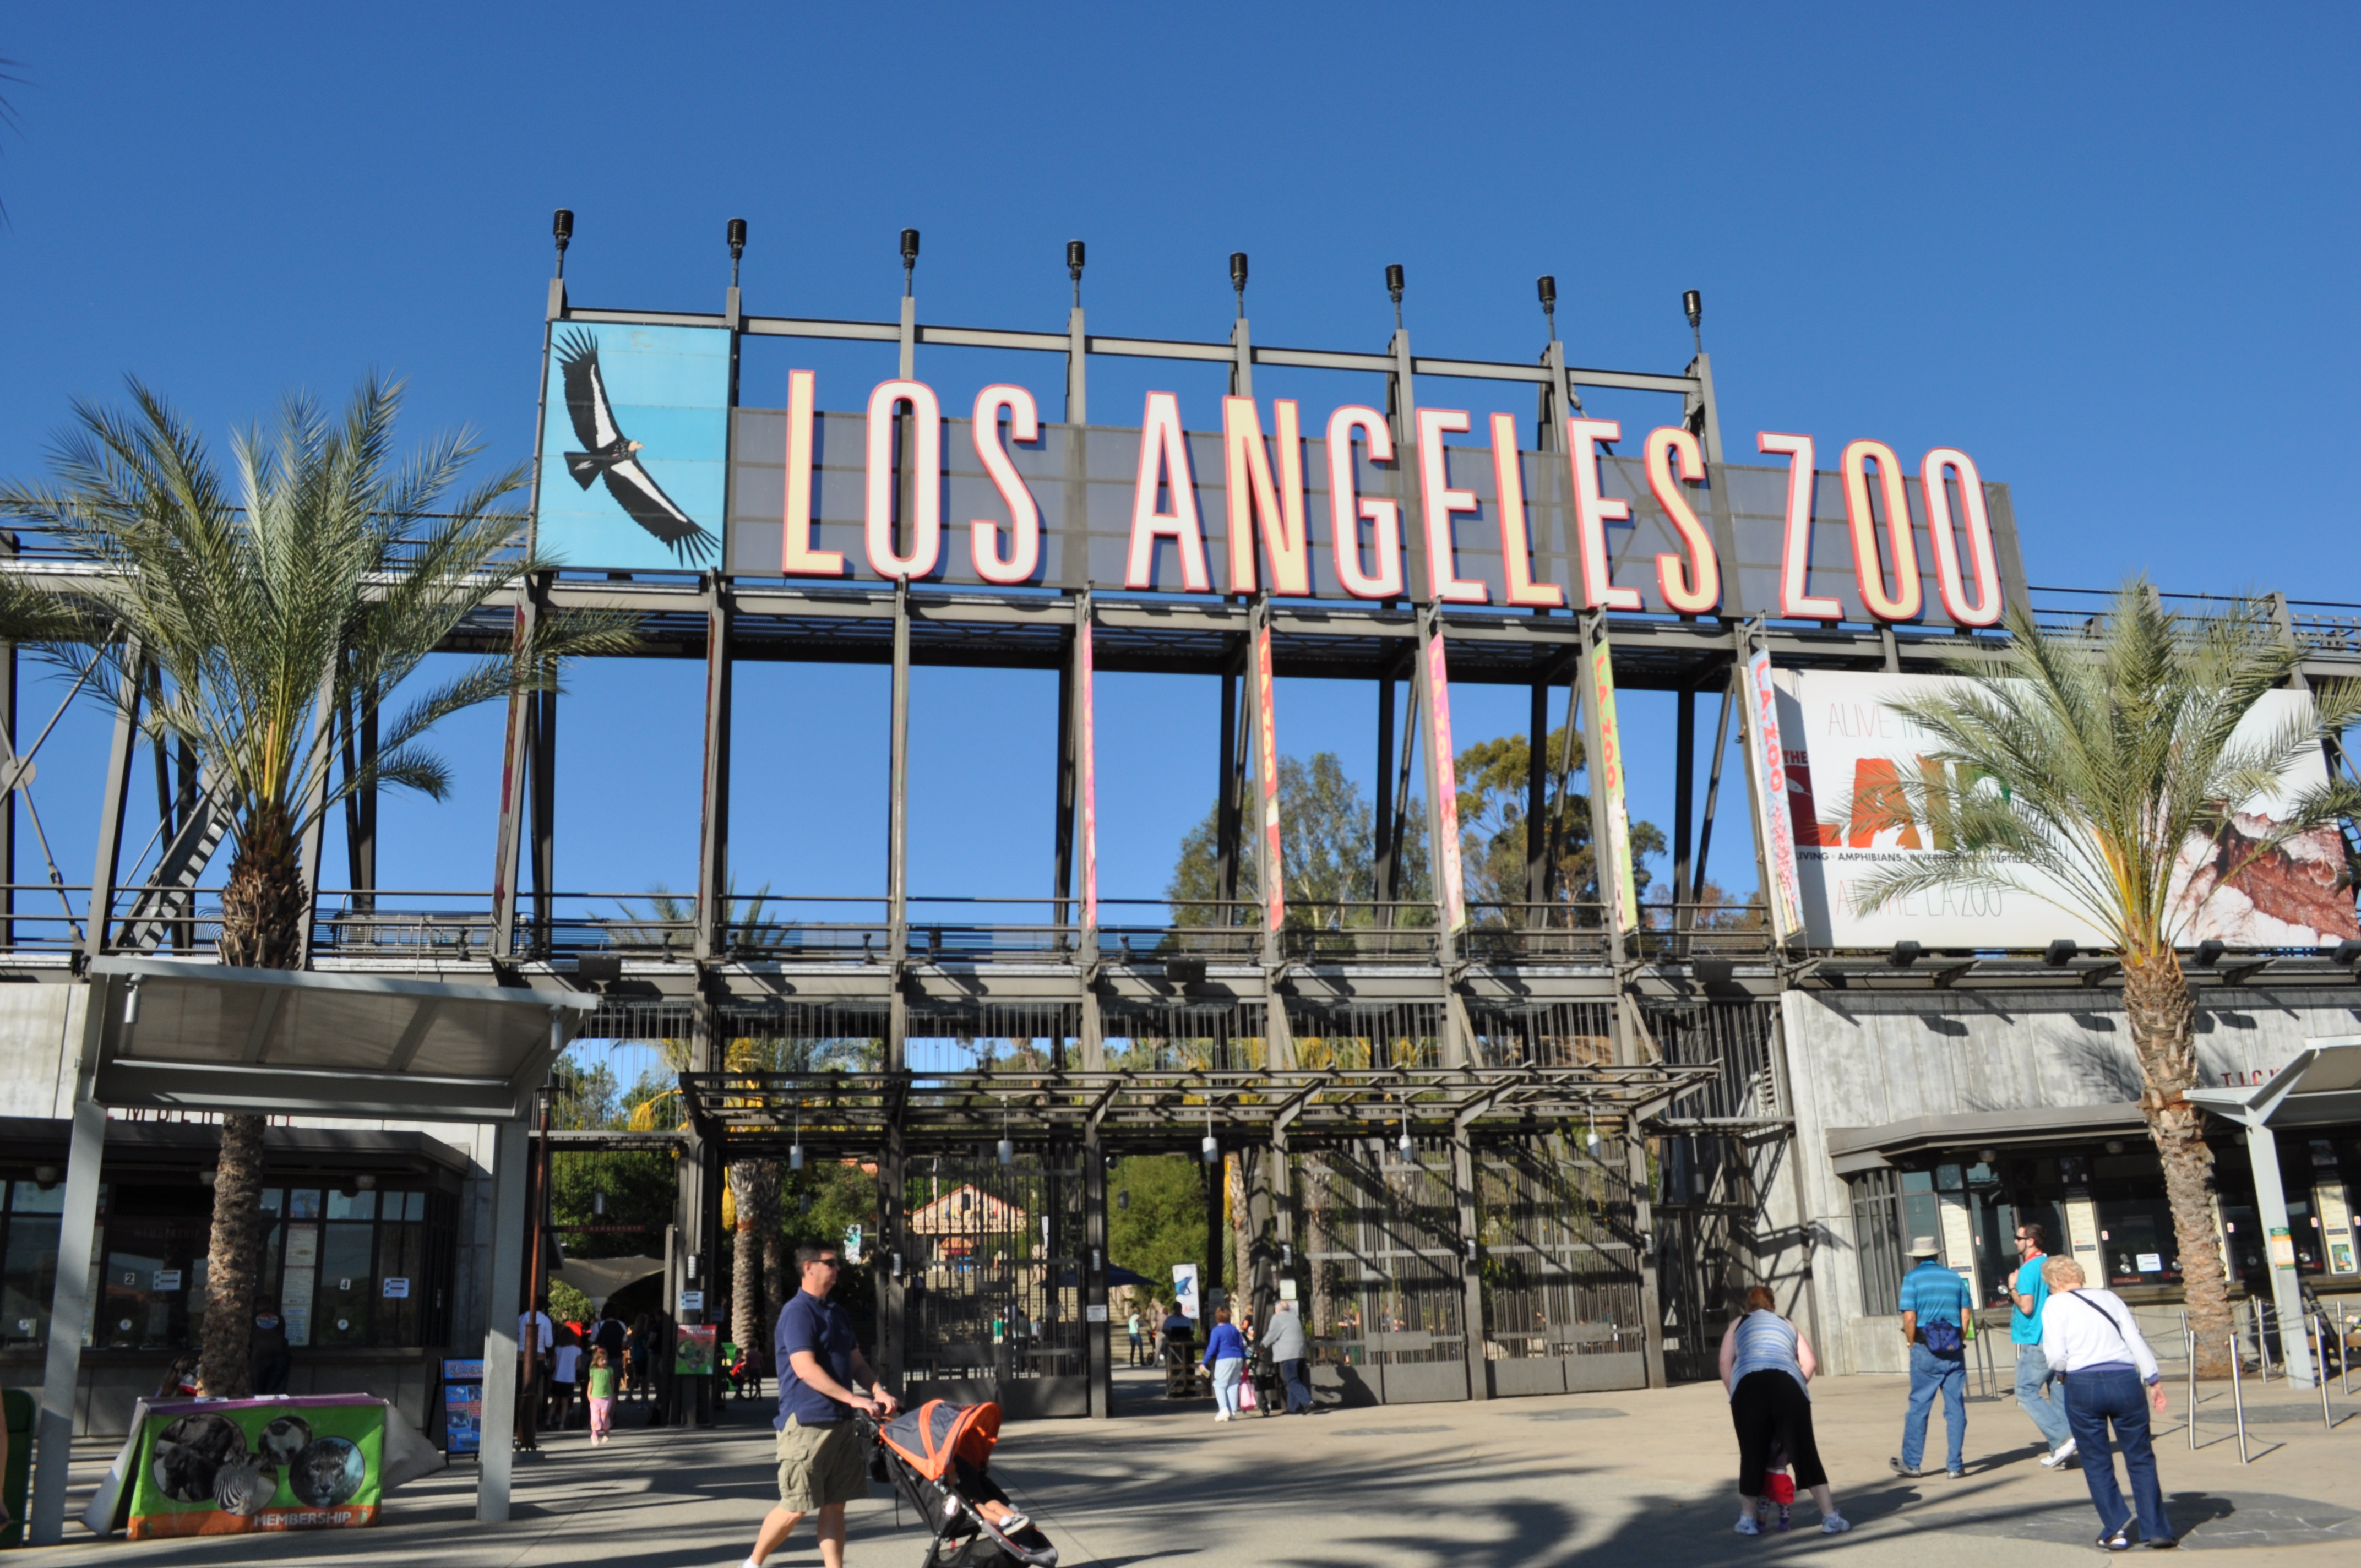 An Insider’s Guide to the Los Angeles Zoo